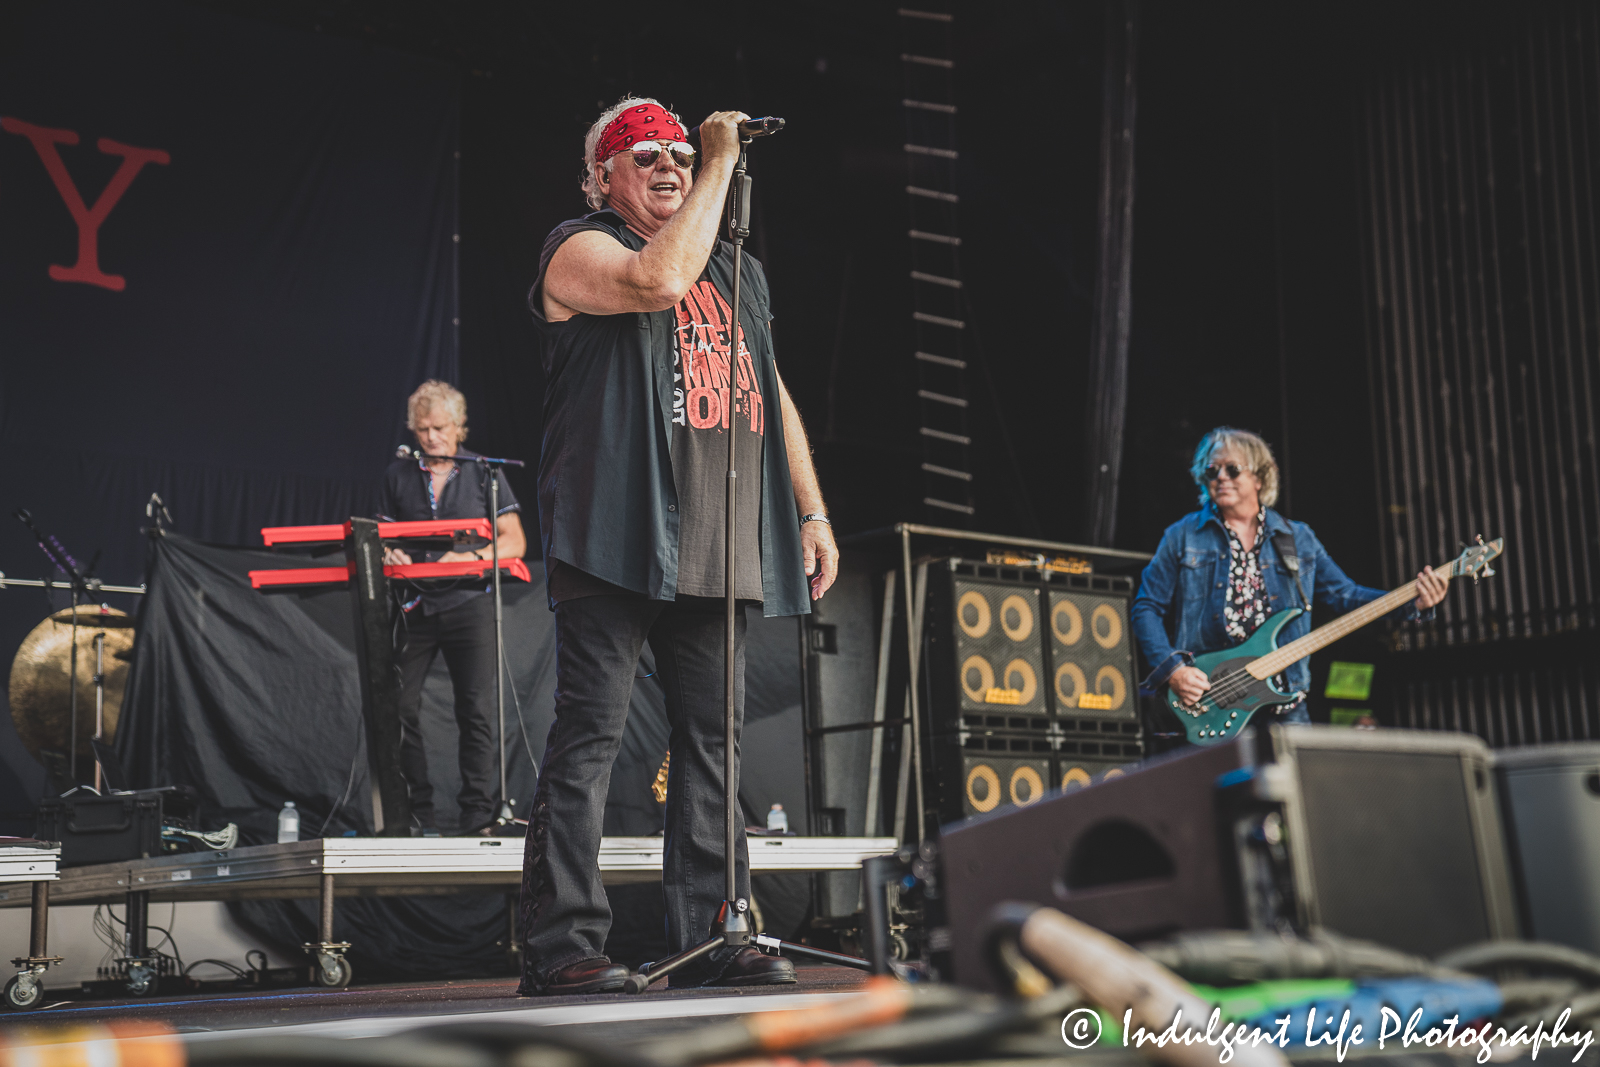 Loverboy band members Mike Reno, Doug Johnson and Ken "Spider" Sinnaeve performing live together at Starlight Theatre in Kansas City, MO on July 18, 2023.